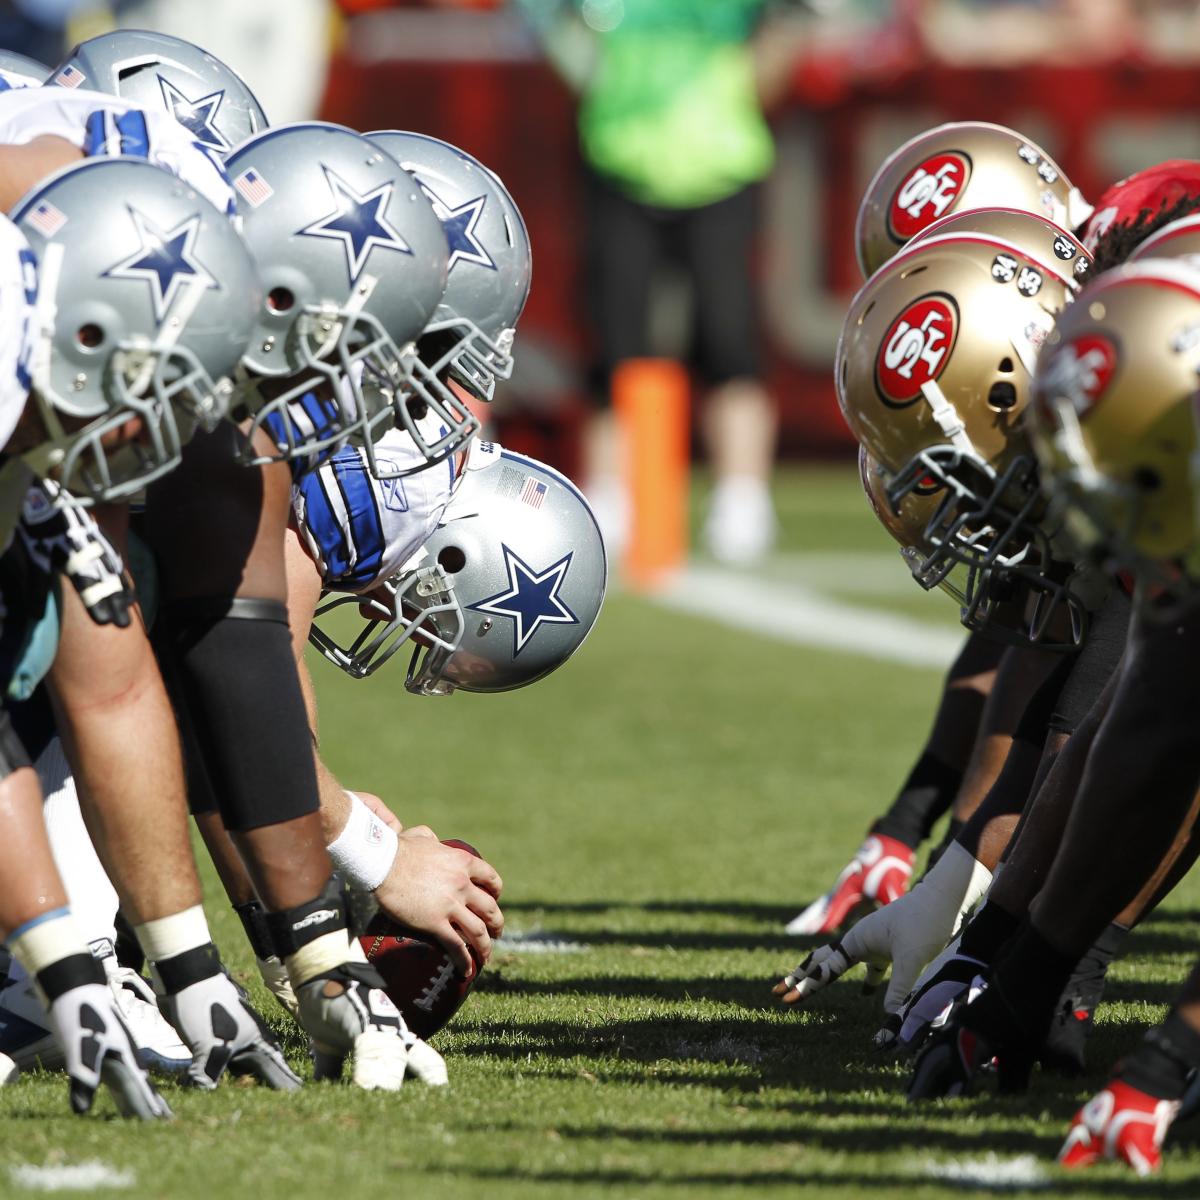 Cowboys vs. 49ers Live Score and Analysis for San Francisco News